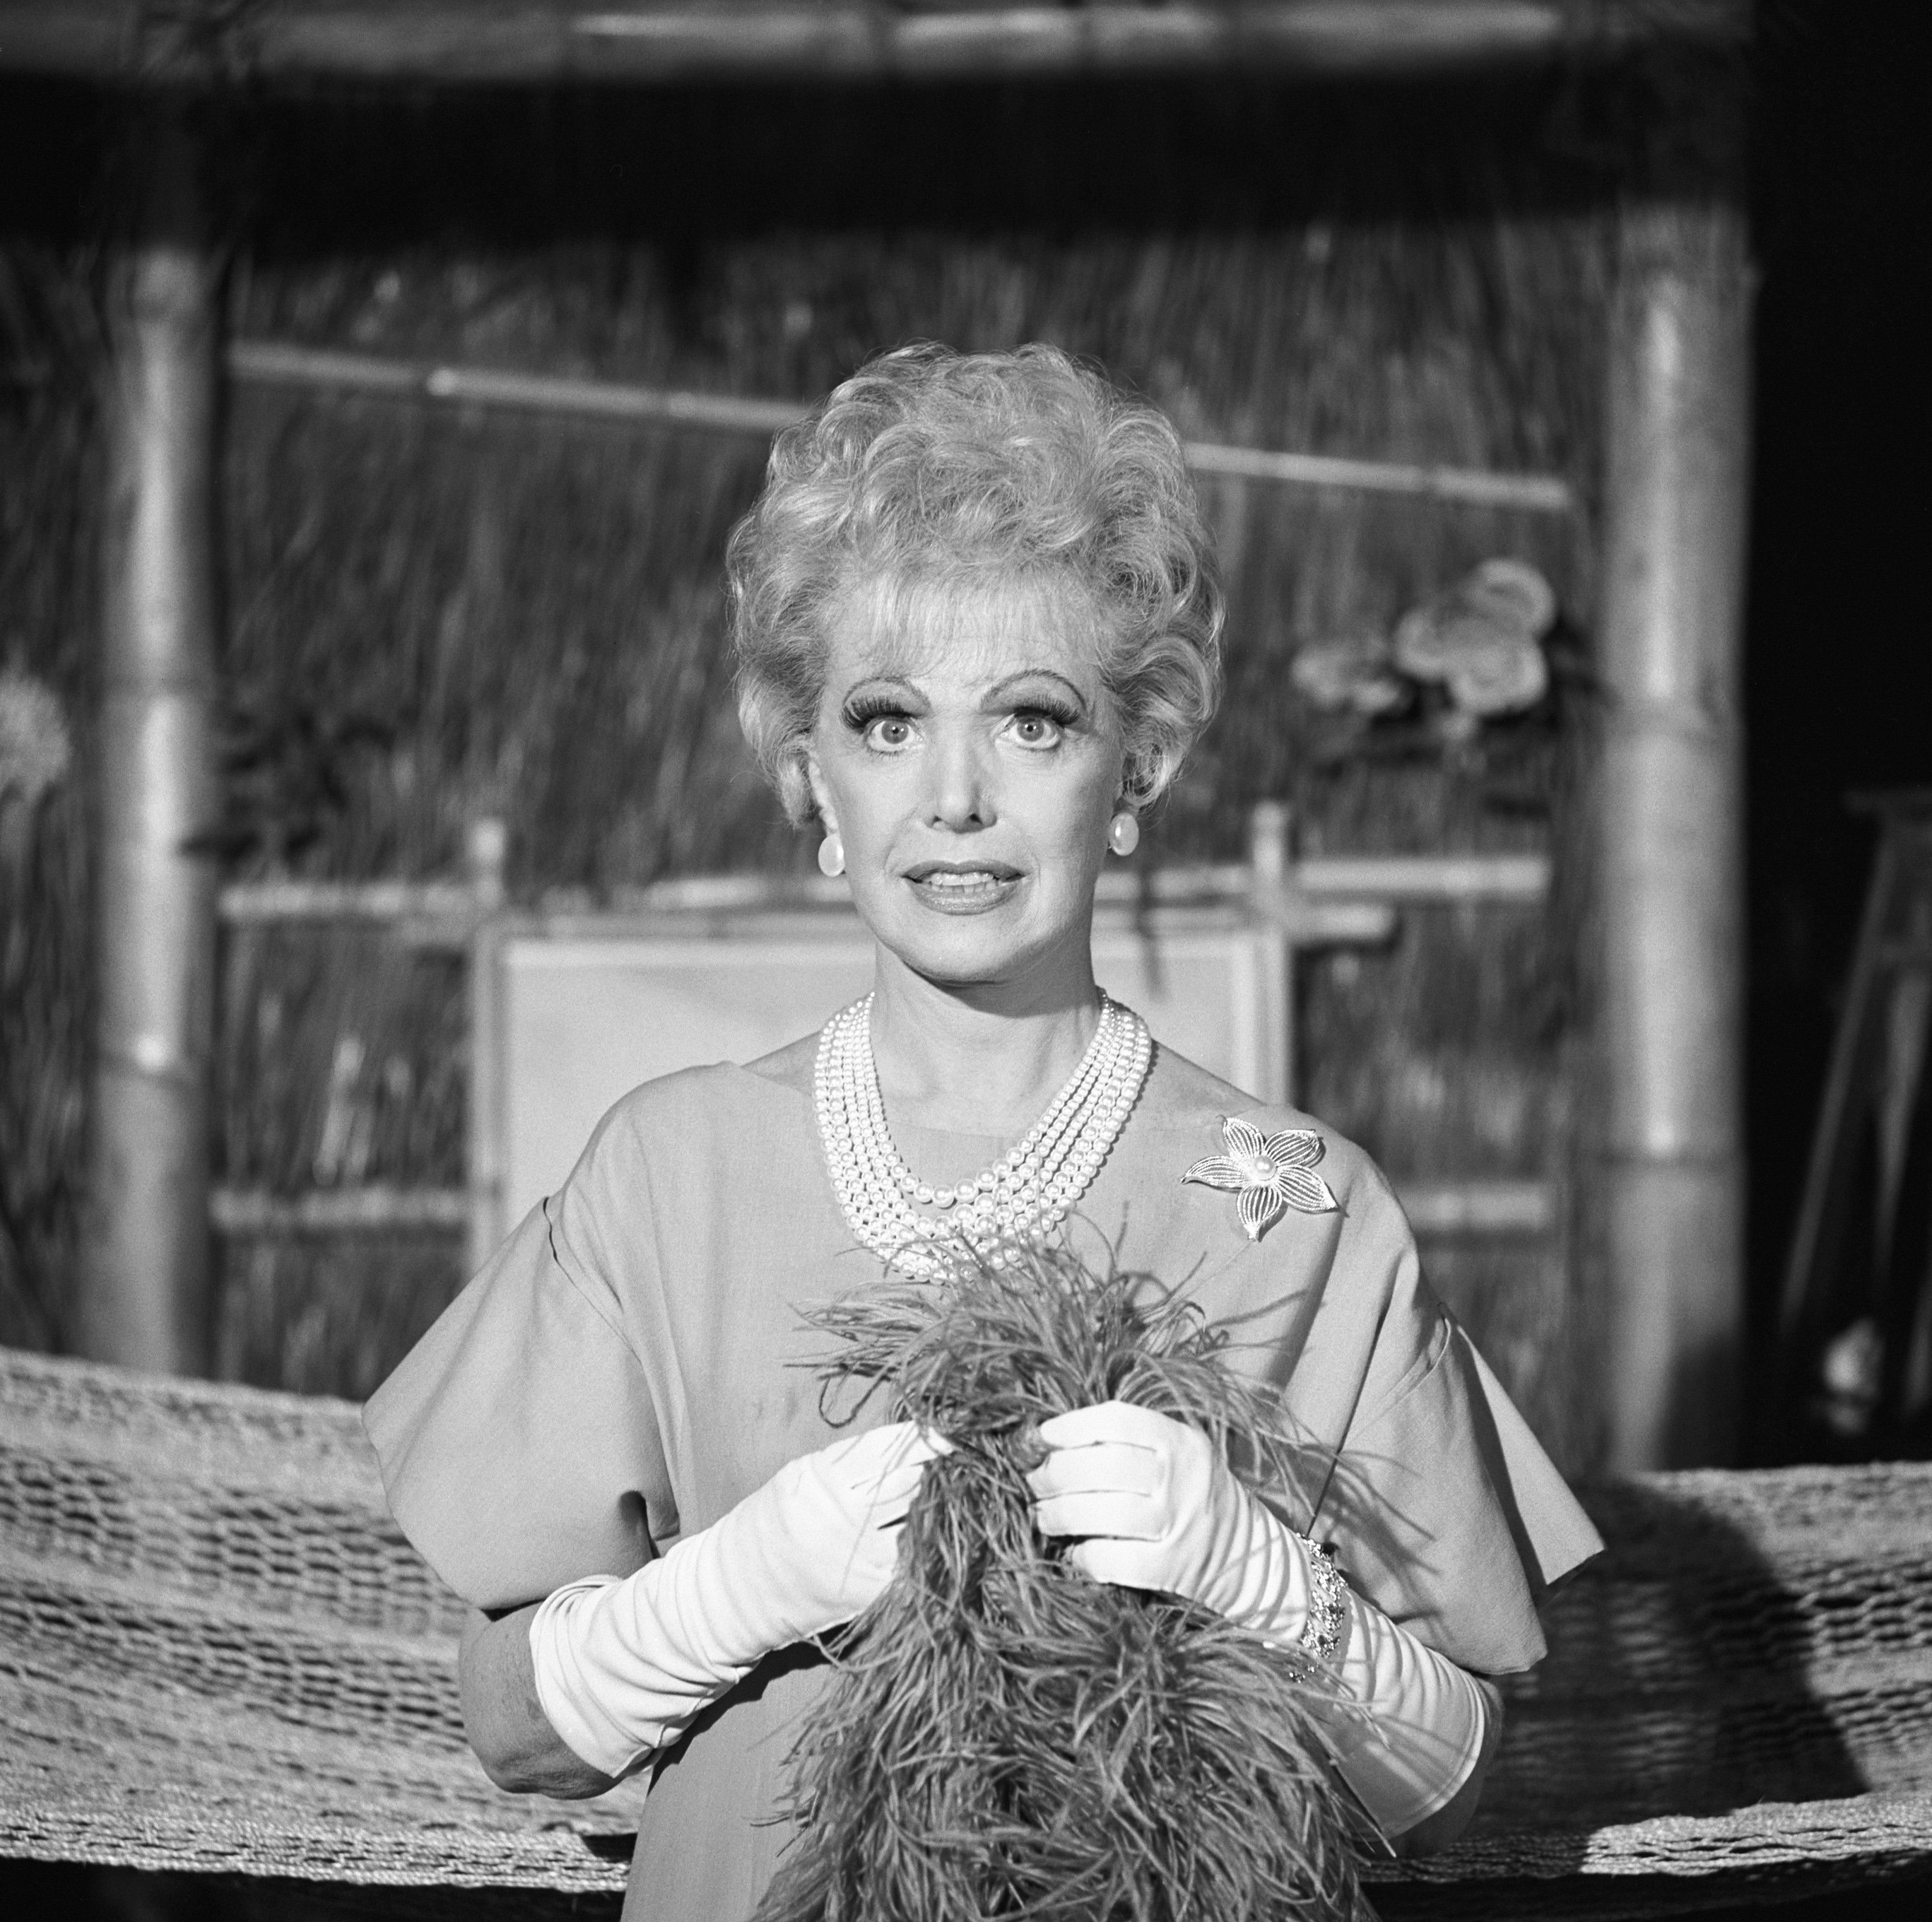 'Gilligan's Island' actor Natalie Schafer wearing a dress, long gloves, pearl necklace, and feather boa standing in front of a bamboo hut.